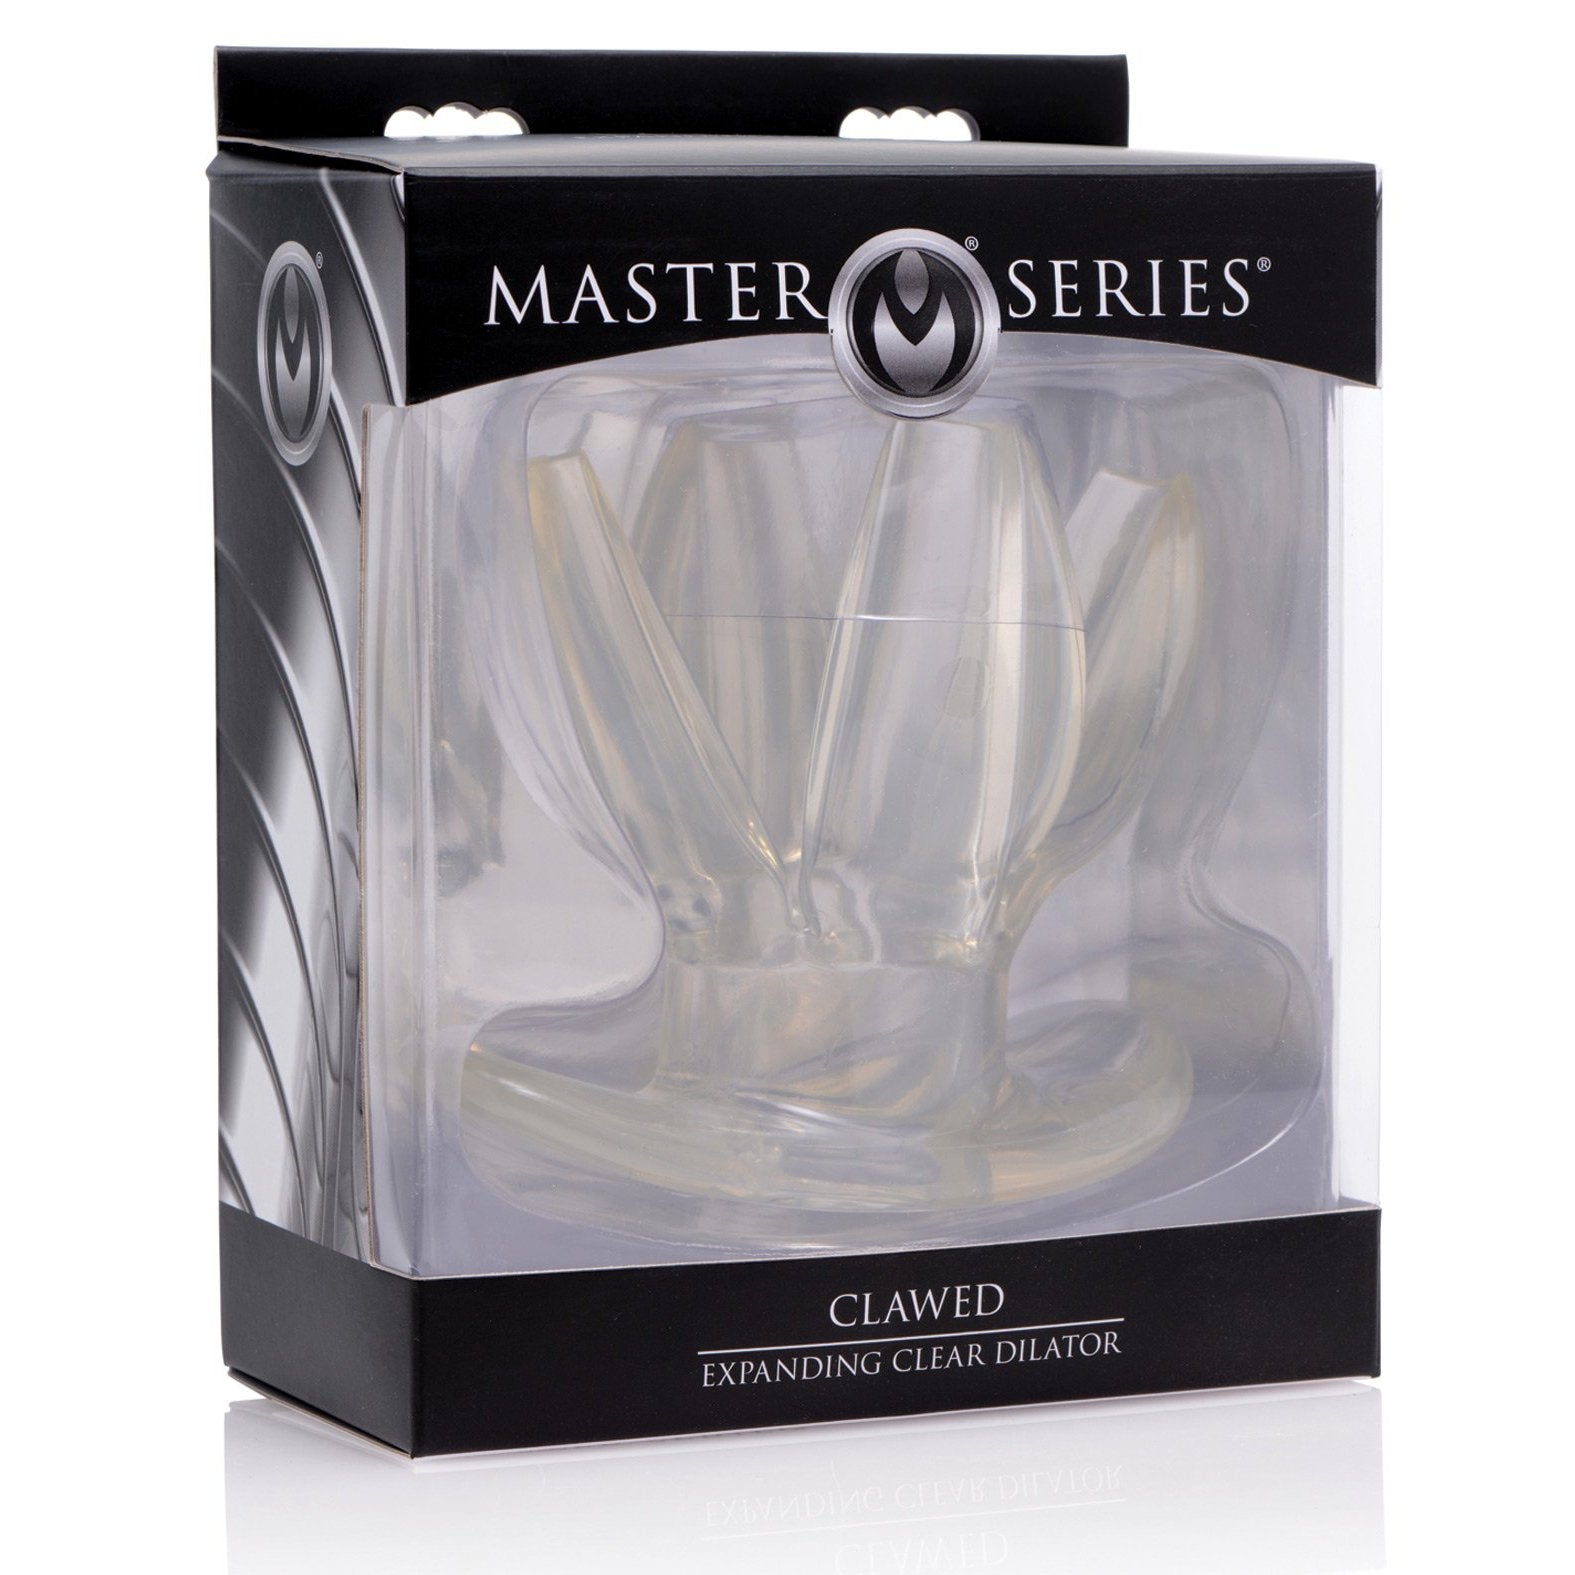 Master Series Claw Expanding Anal Dilator